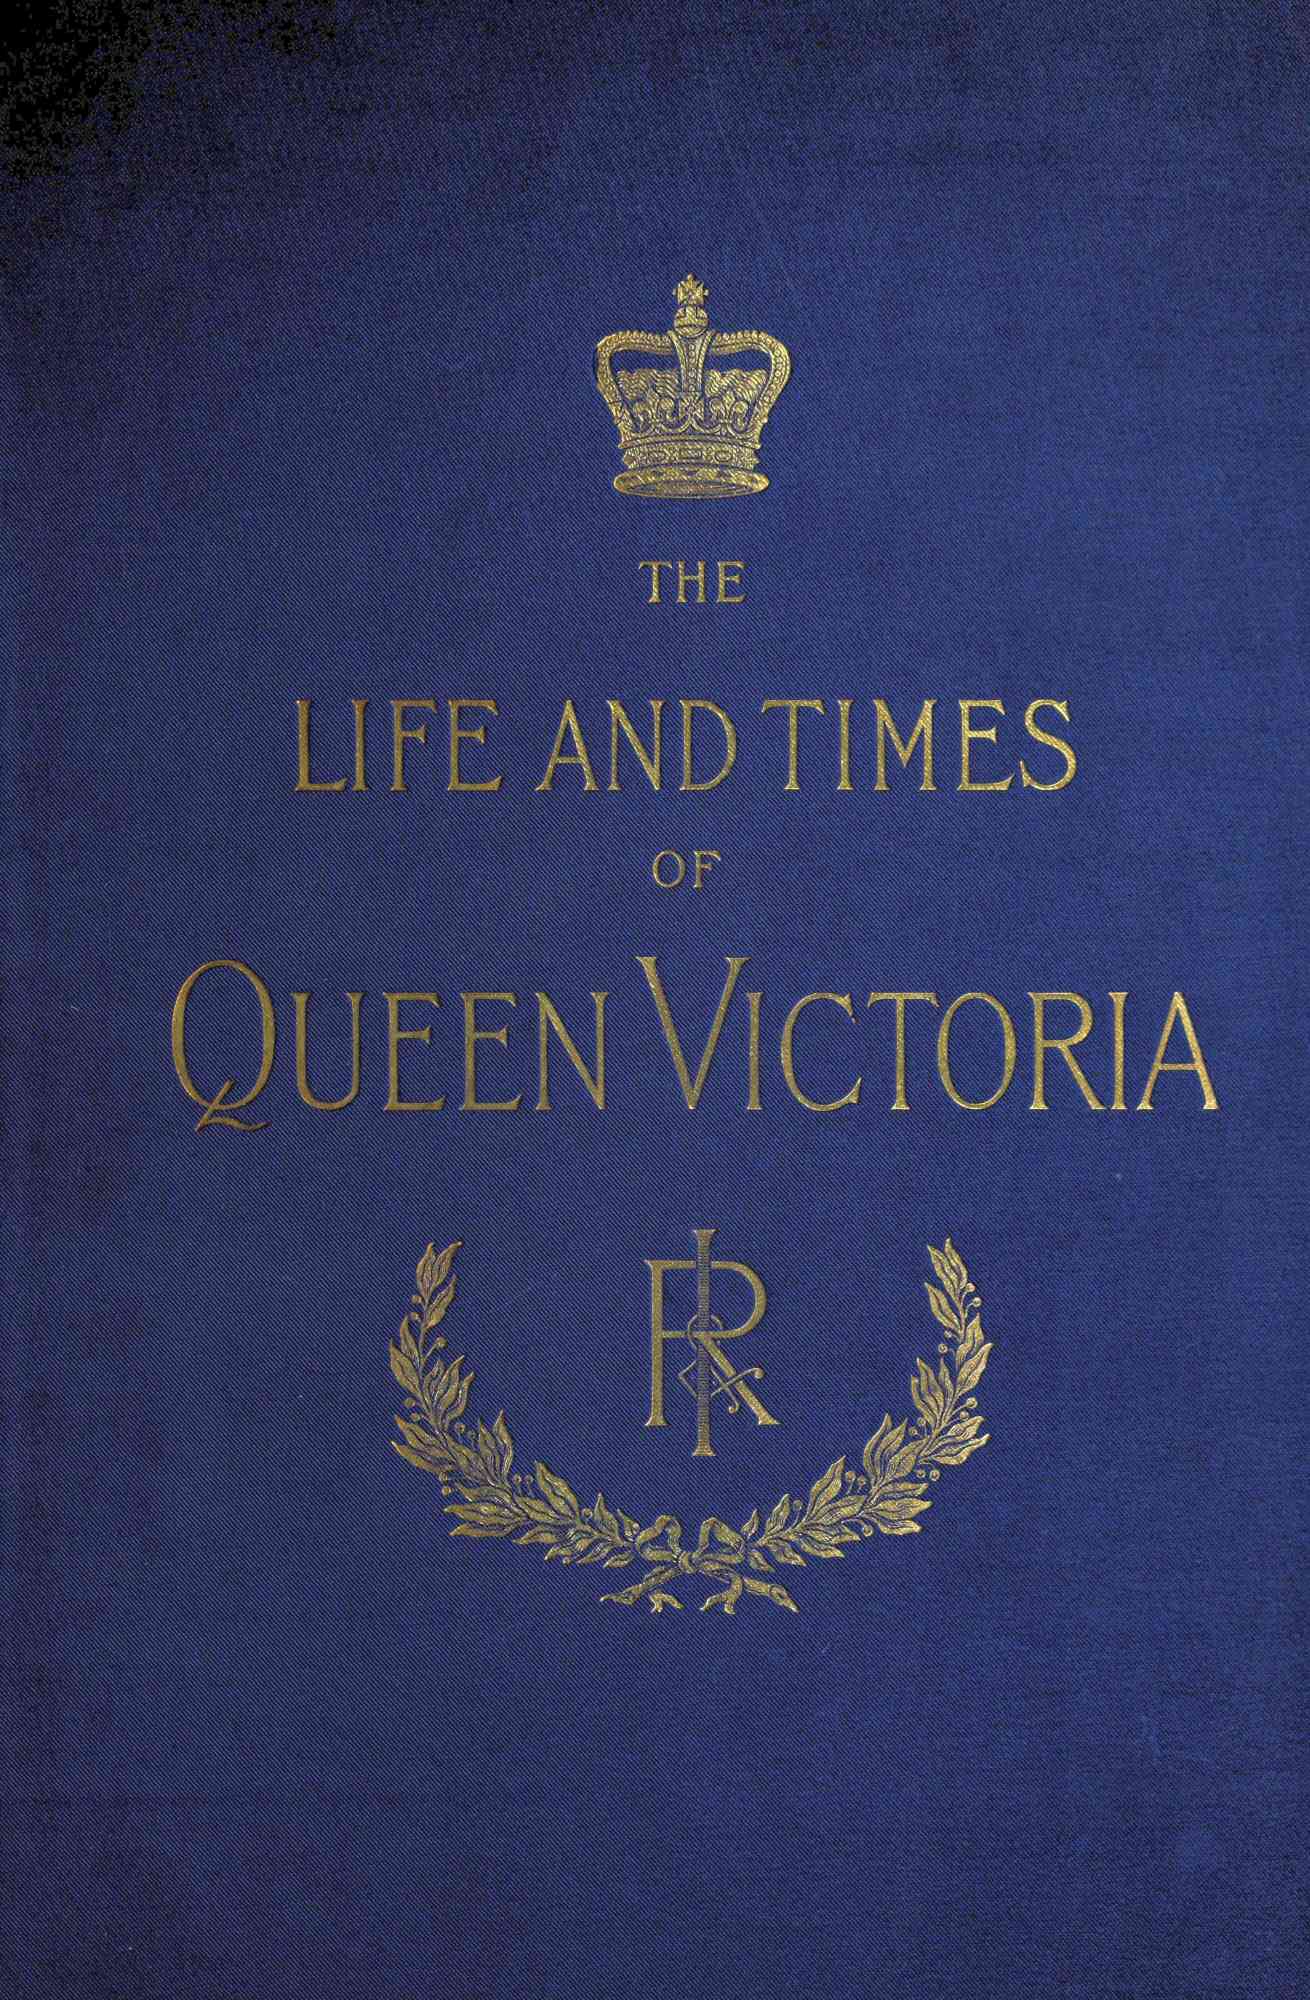 Letter from Queen Victoria mentioning chloroform use in childbirth